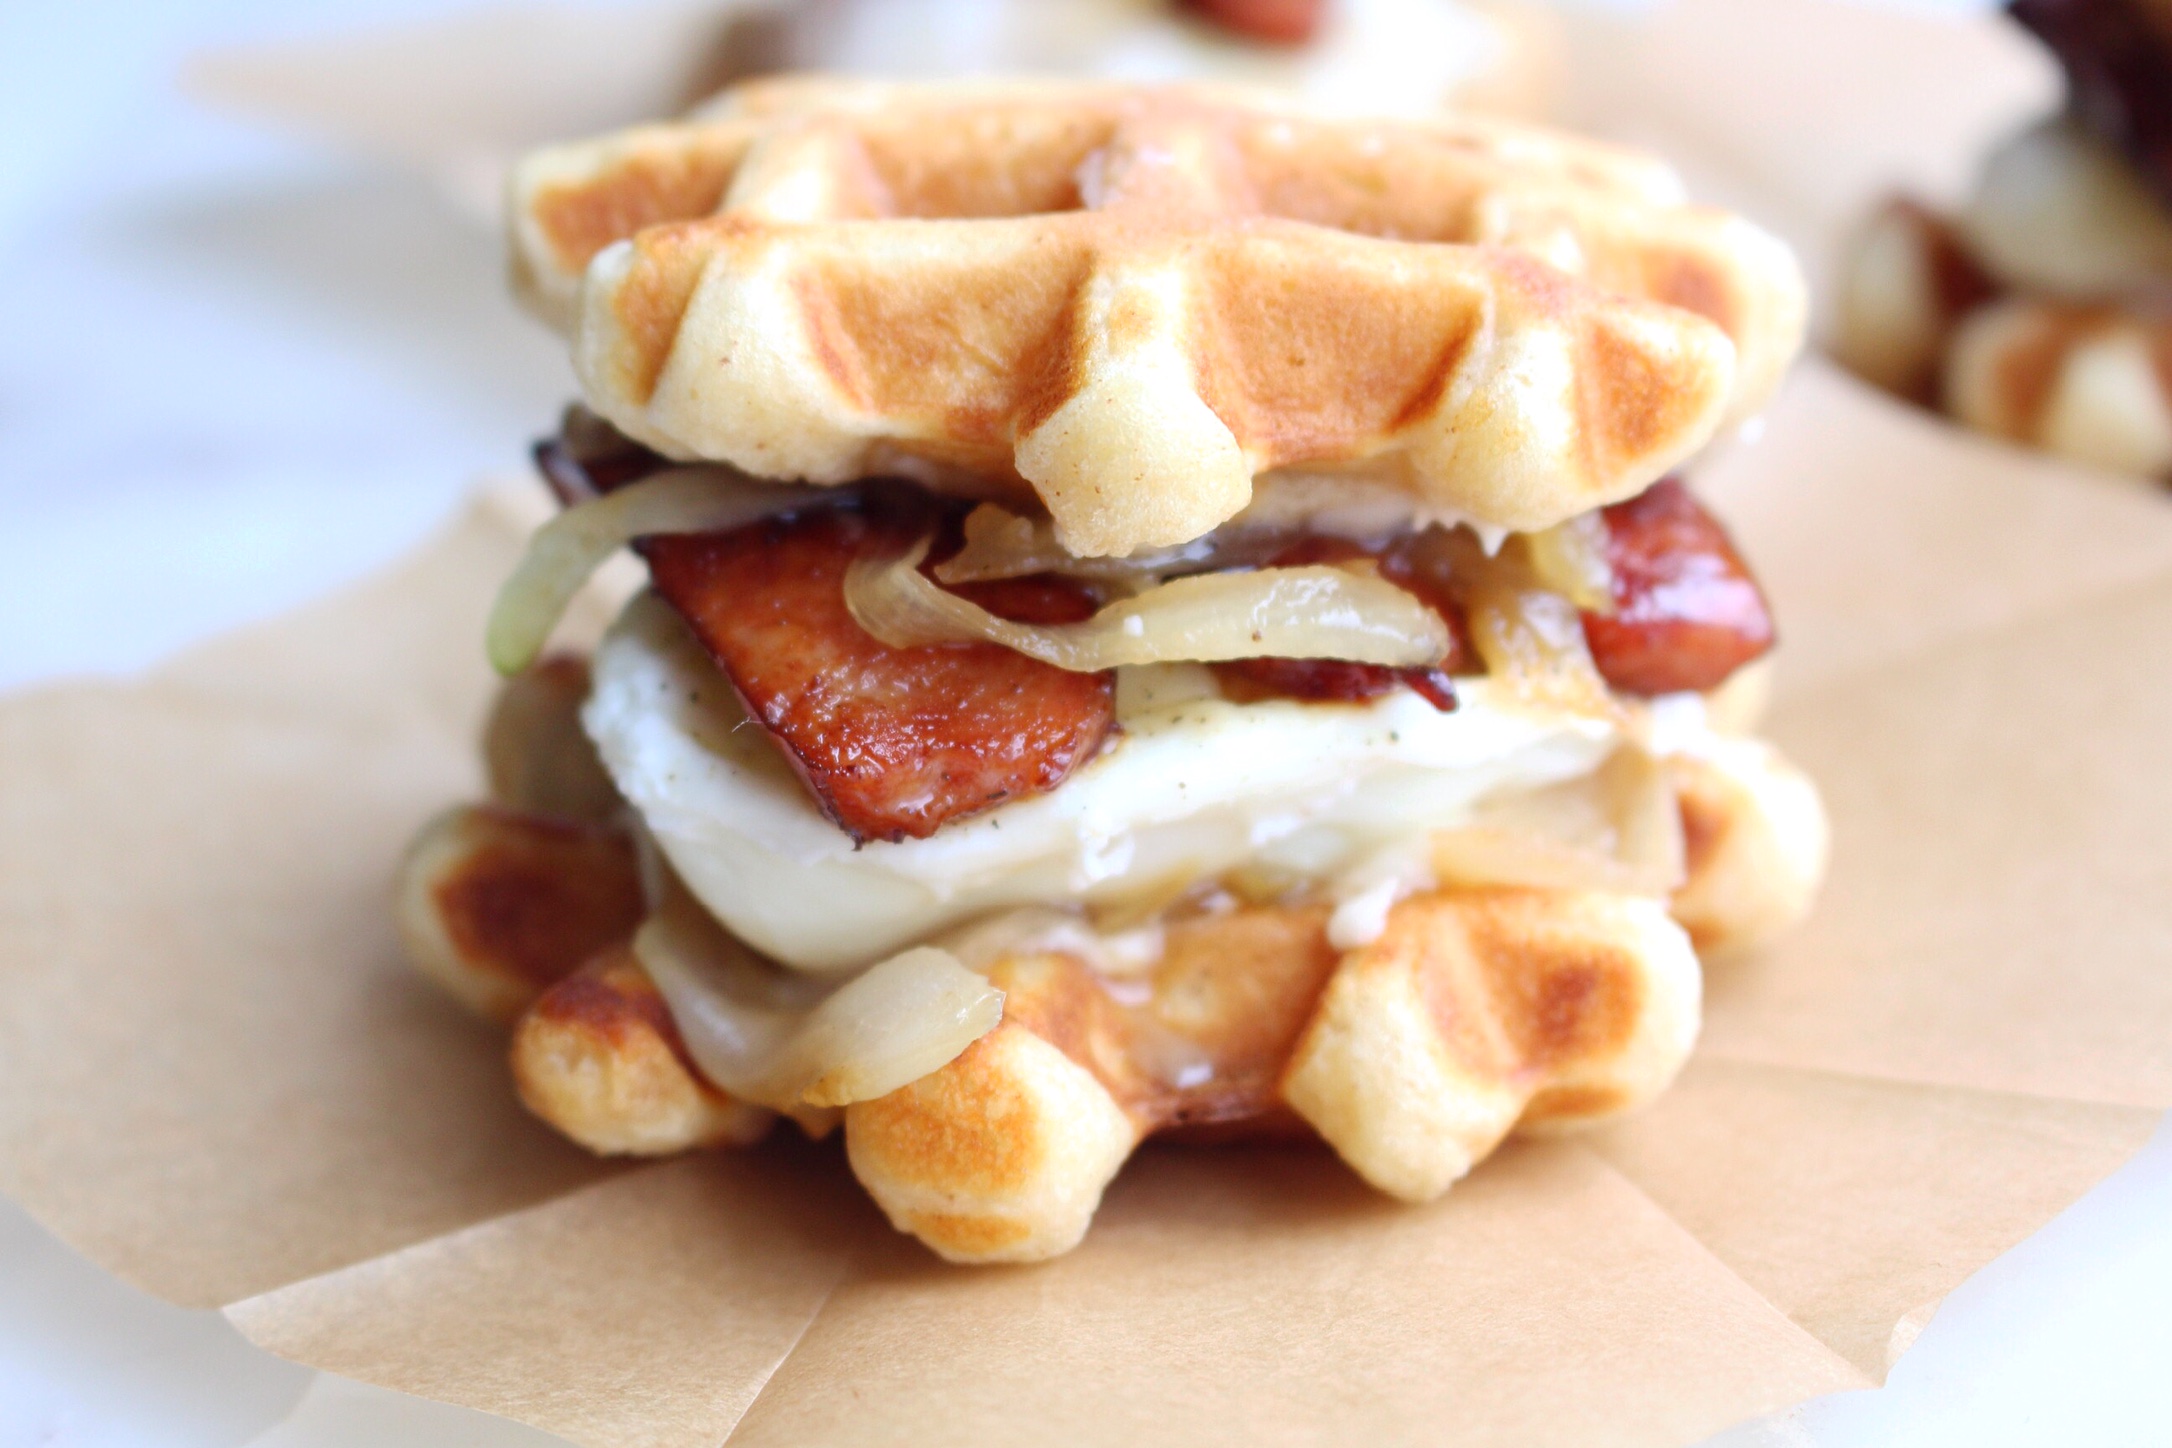 Mini Waffle Breakfast Sandwiches - The Sweet and Simple Kitchen